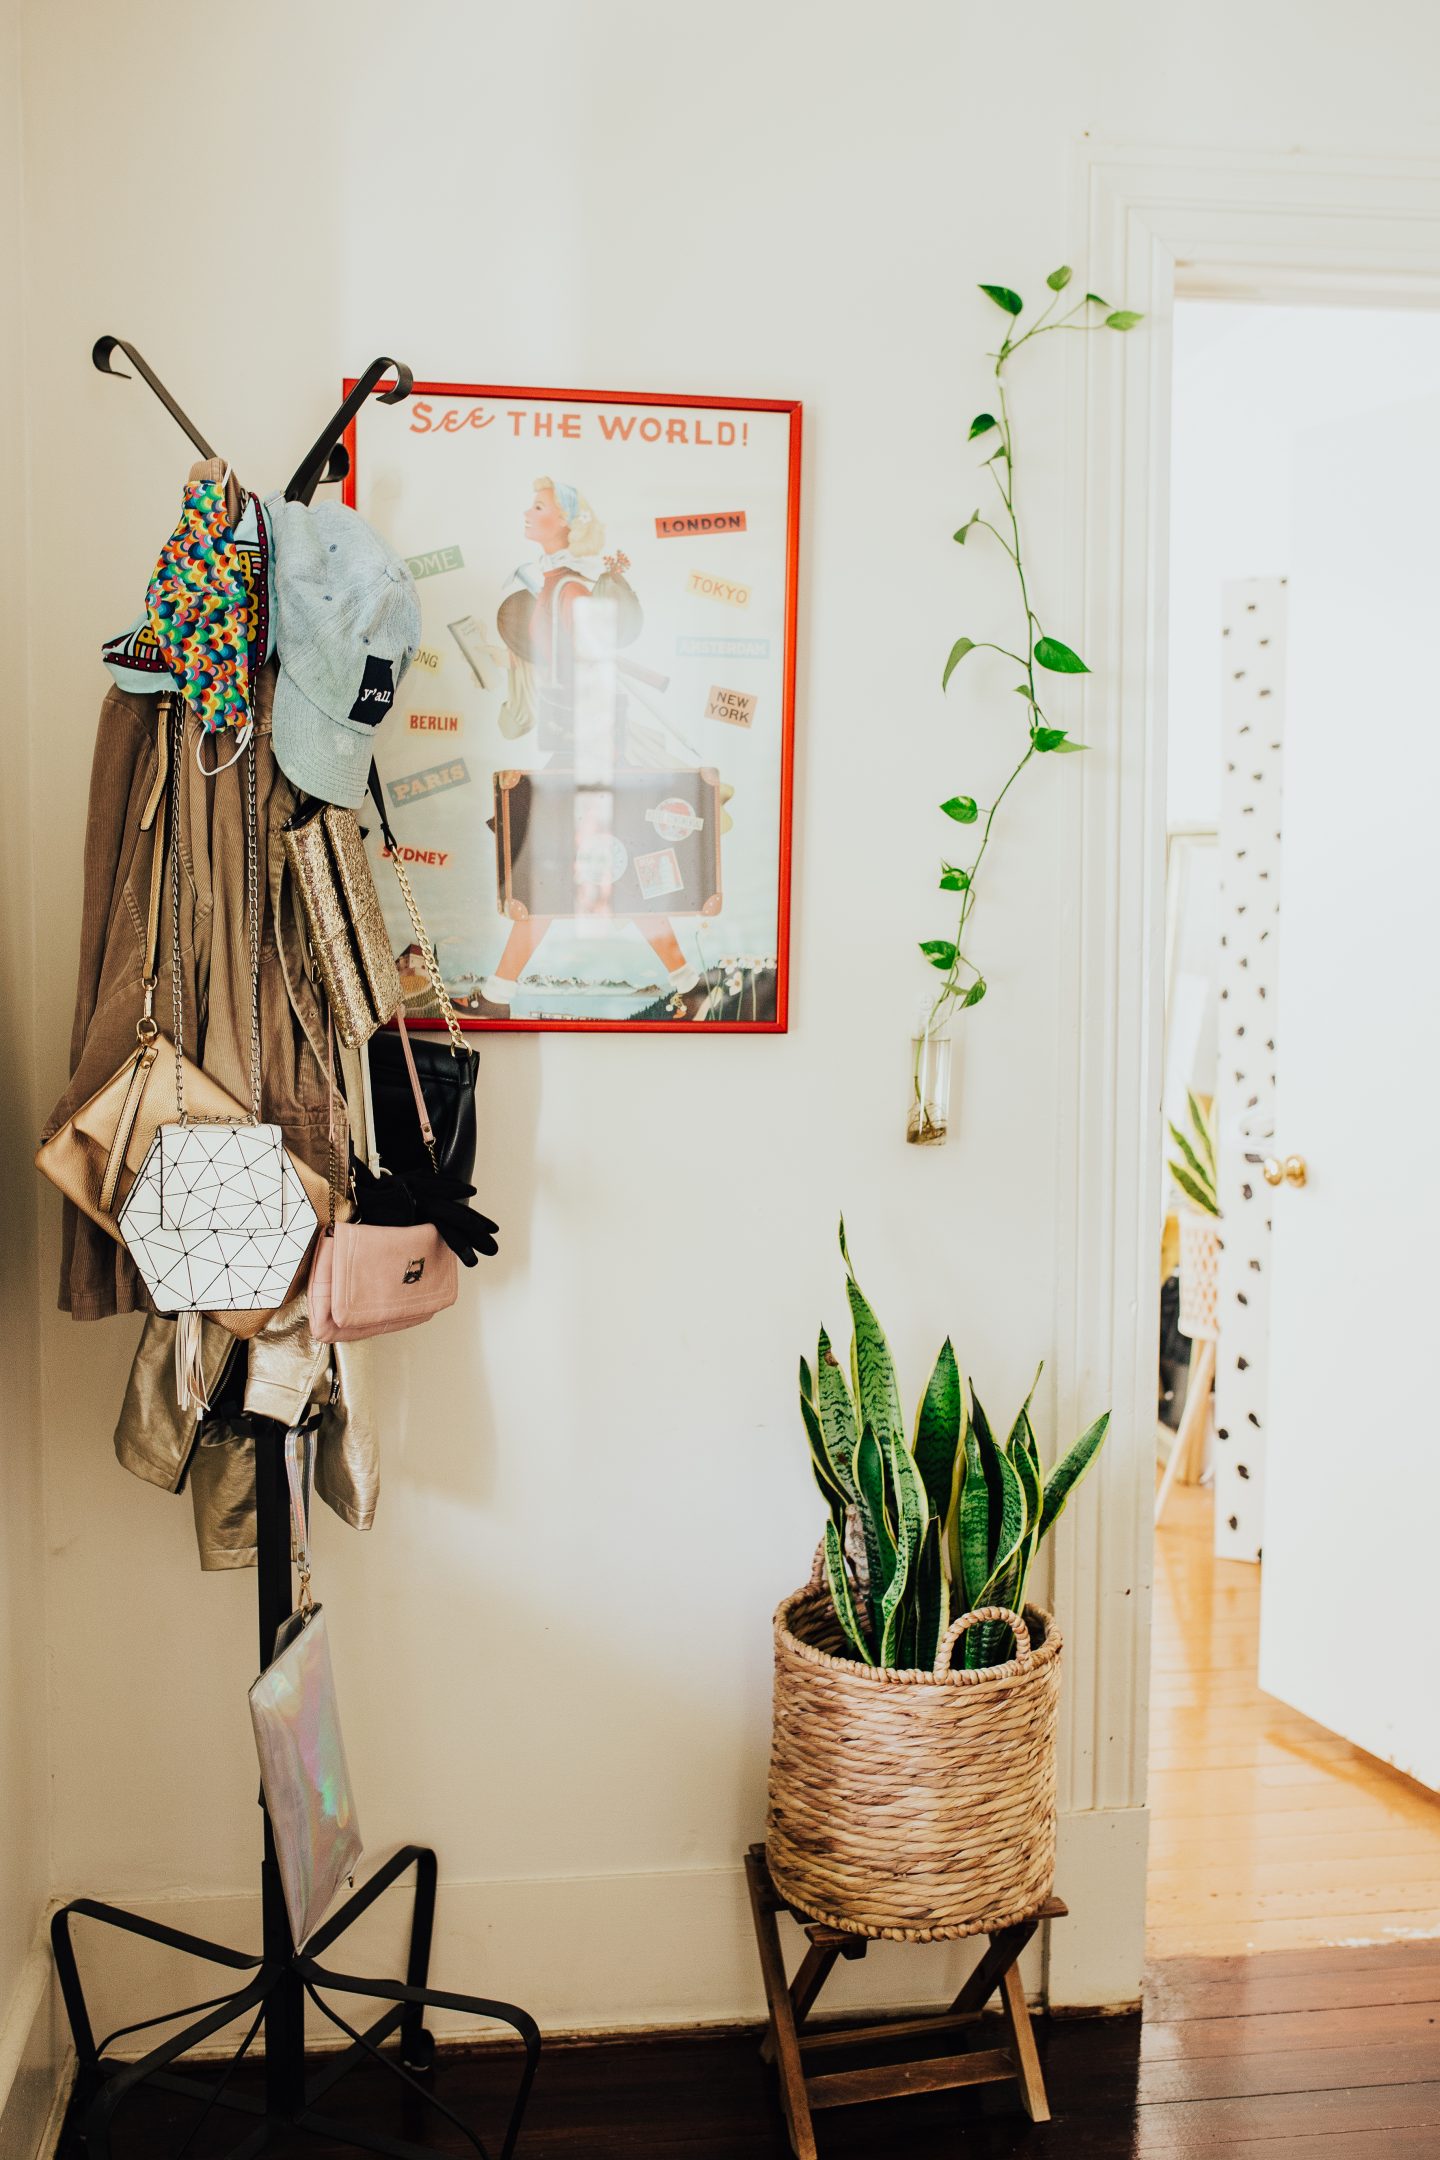 Want to have a jungalow vibe but worried about keeping your plants alive? Check out my top 5 indoor plants for beginners that are hard to kill even for those with the blackest of thumbs!